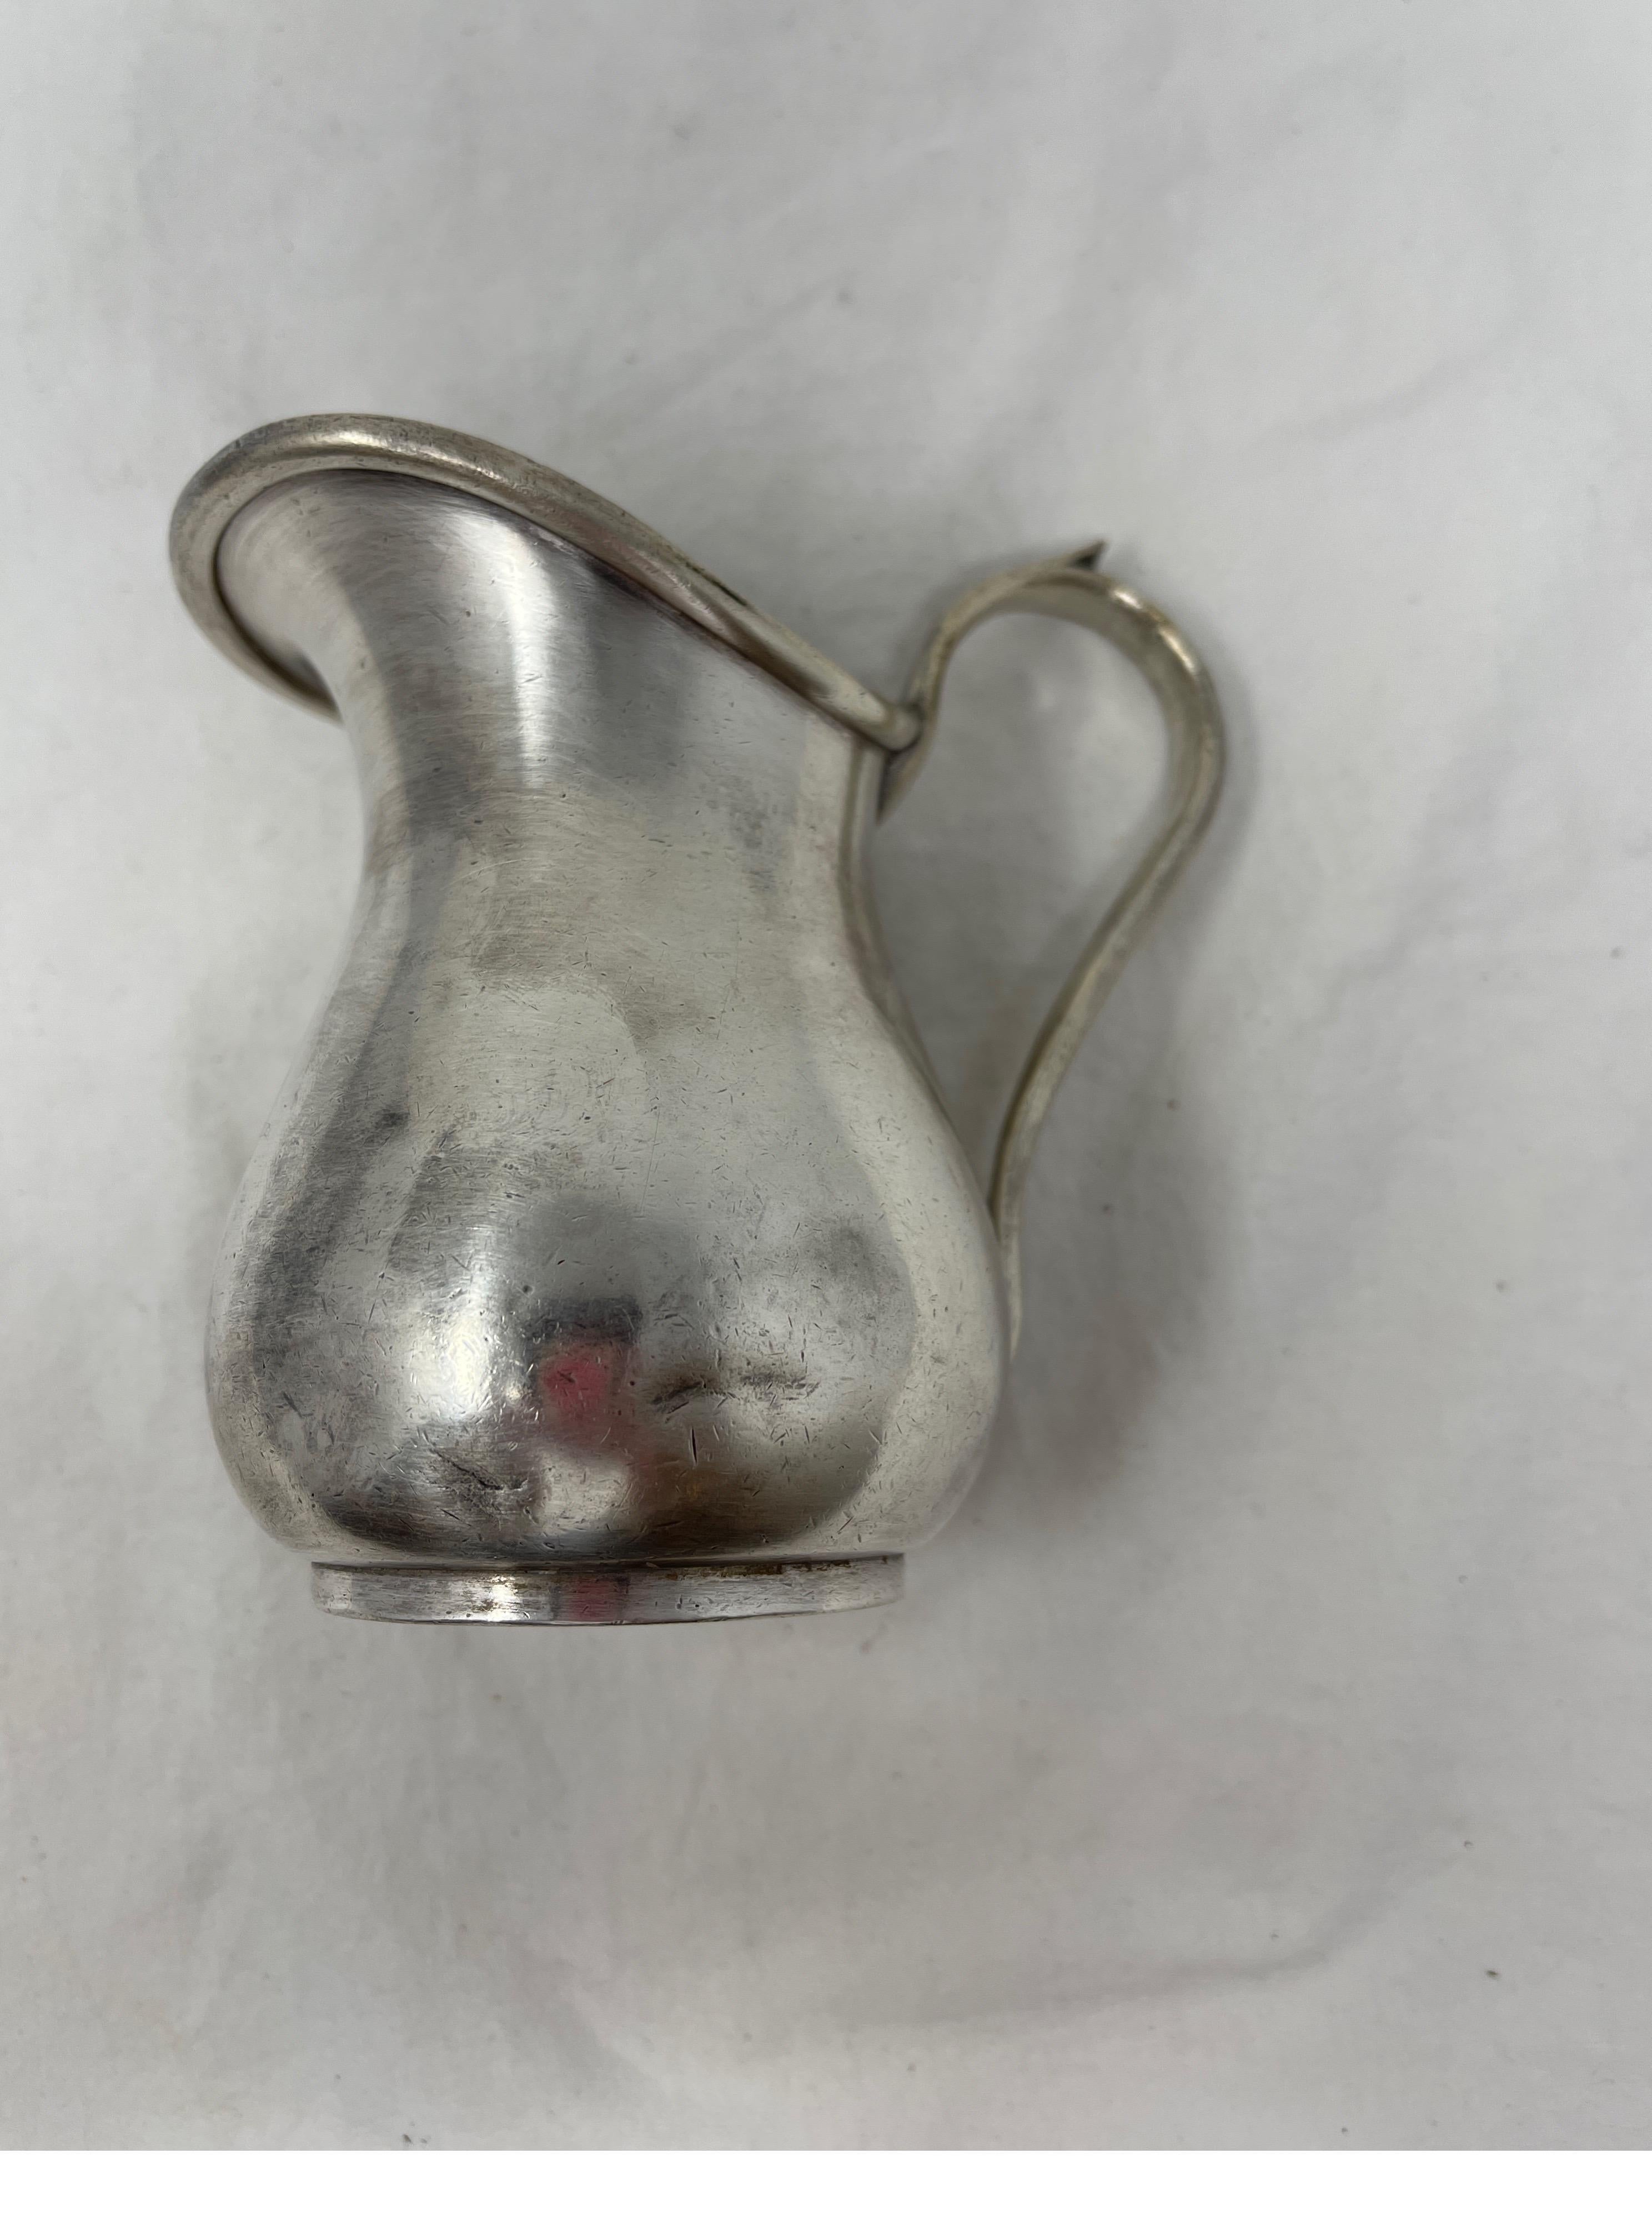 Enjoy your coffee or tea with this adorable little 19th century Hotel Silver creamer. Elevate your morning routine or use this pitcher to old pens, pencils or a fresh cut flower.

Measures: 3